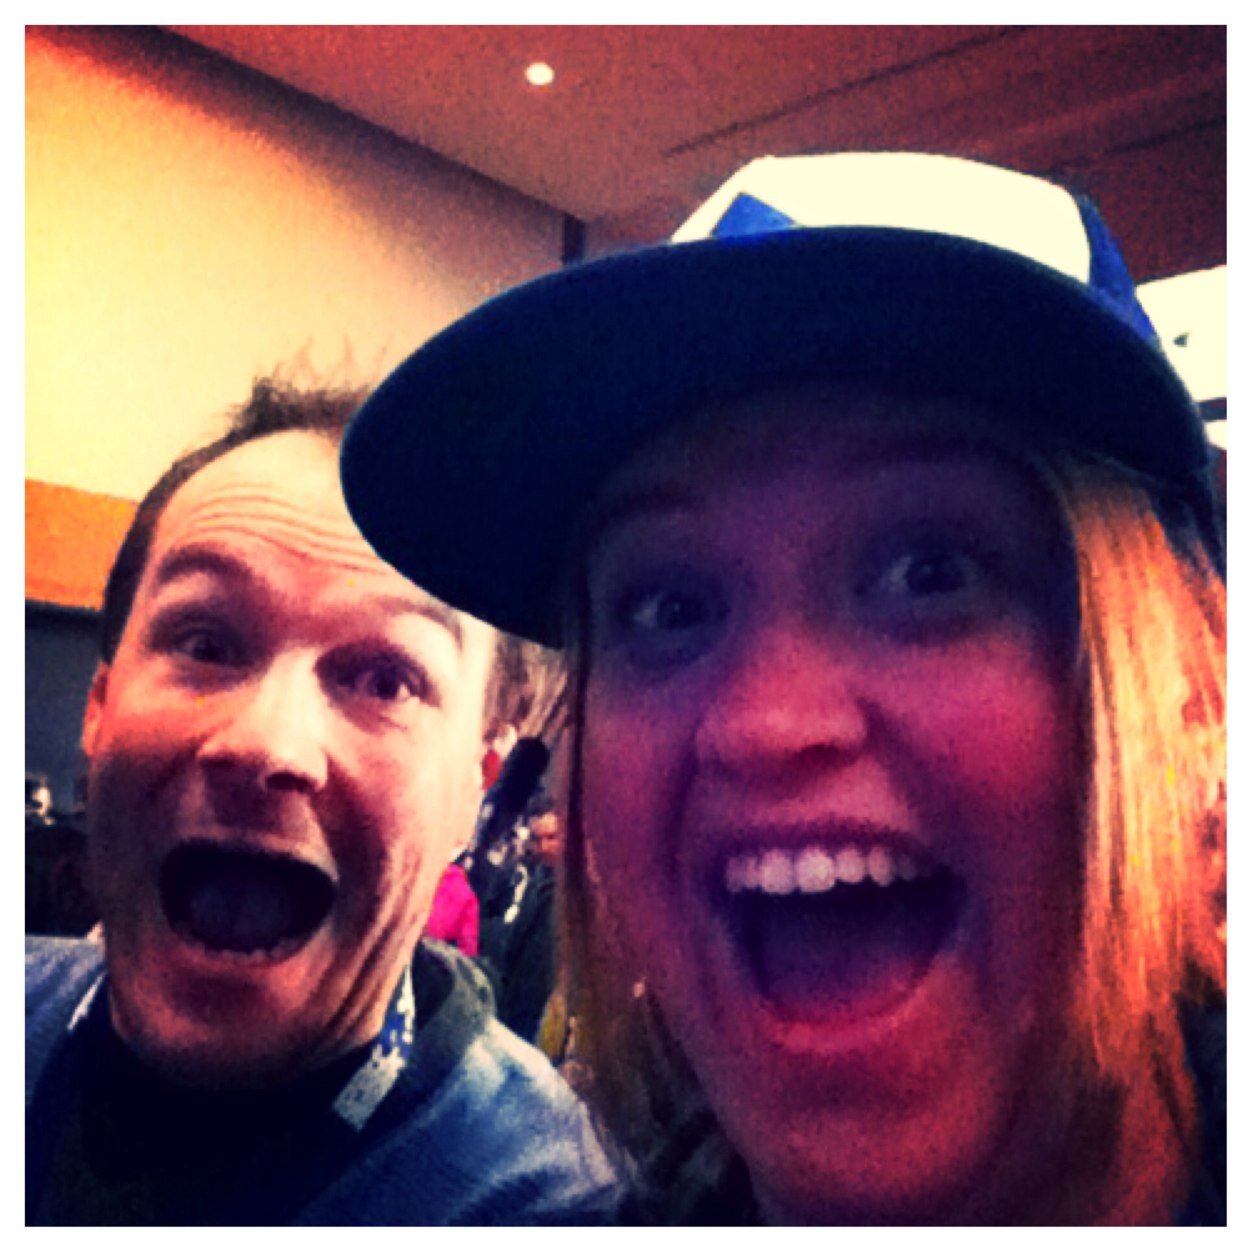 Two Blizzard Entertainment employees descend on PAX East 2014 to check out as much as they can!